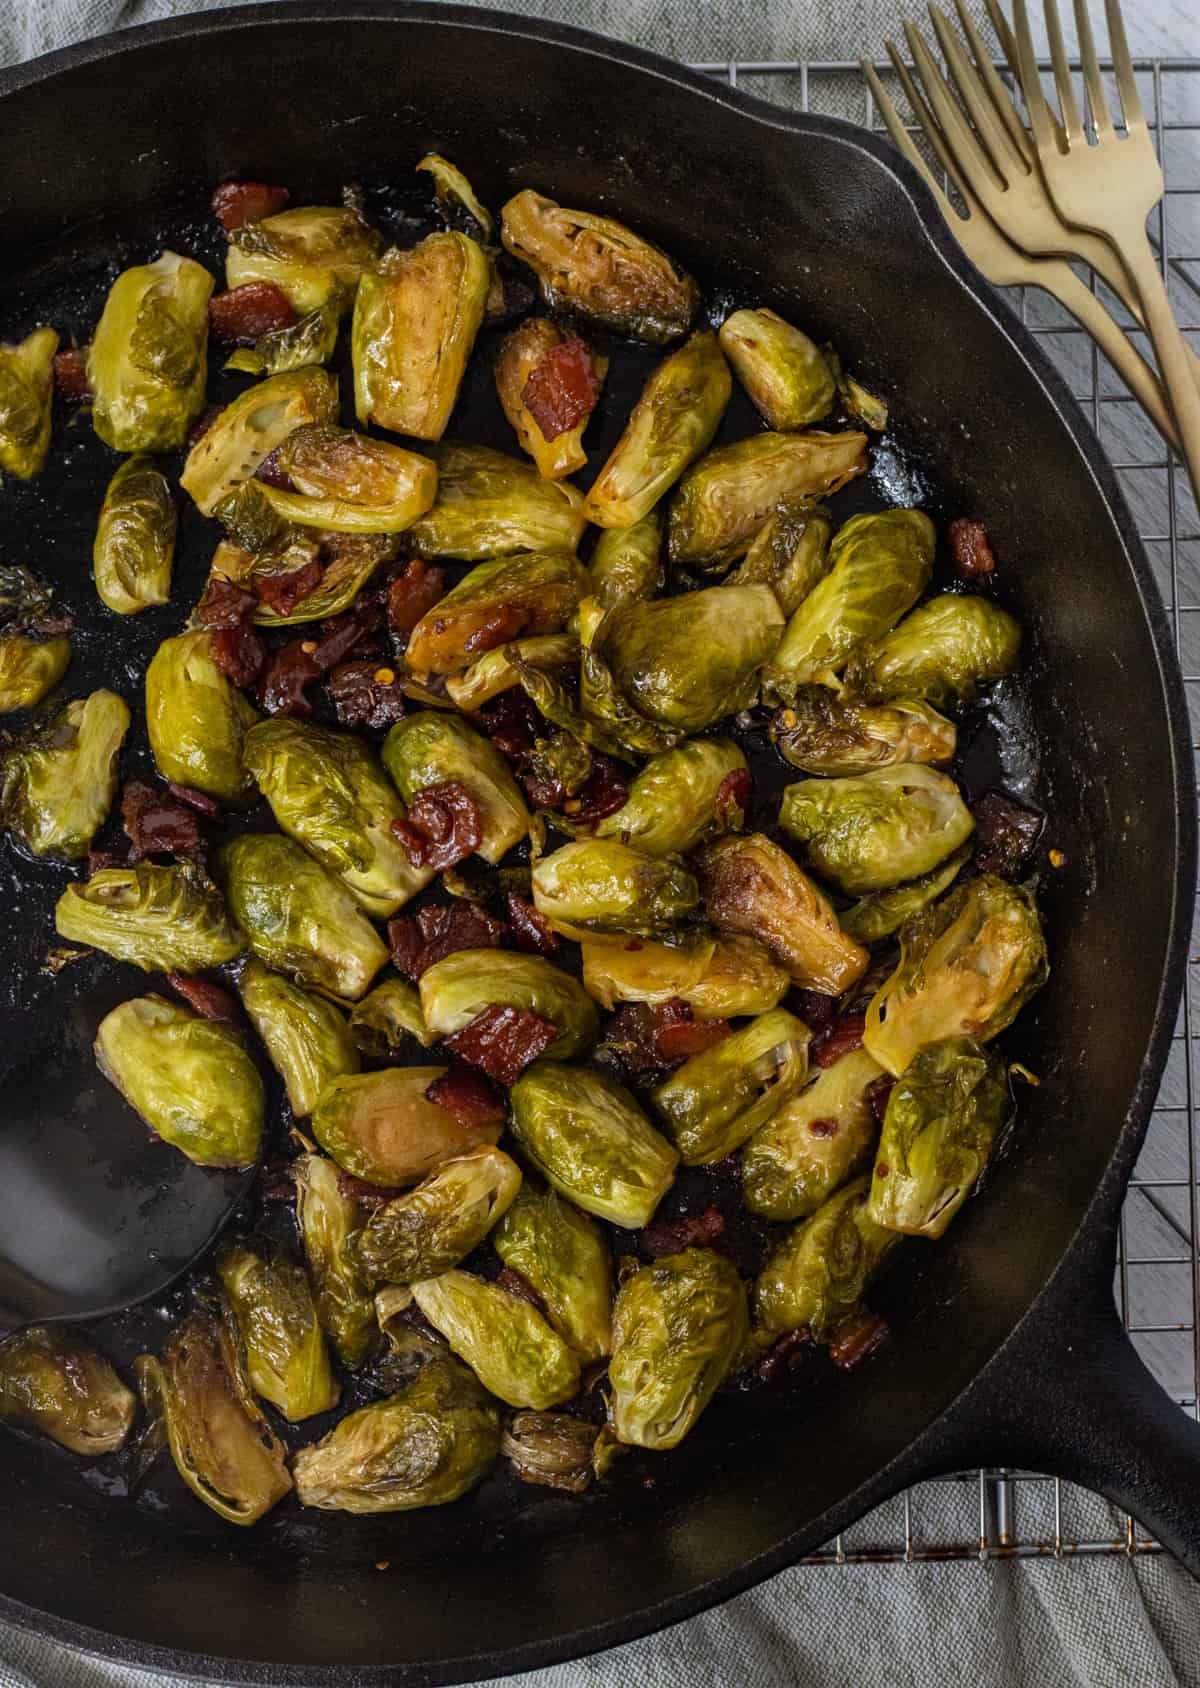 Caramelized Brussels sprouts in a cast iron pan over a wire rack next to forks.